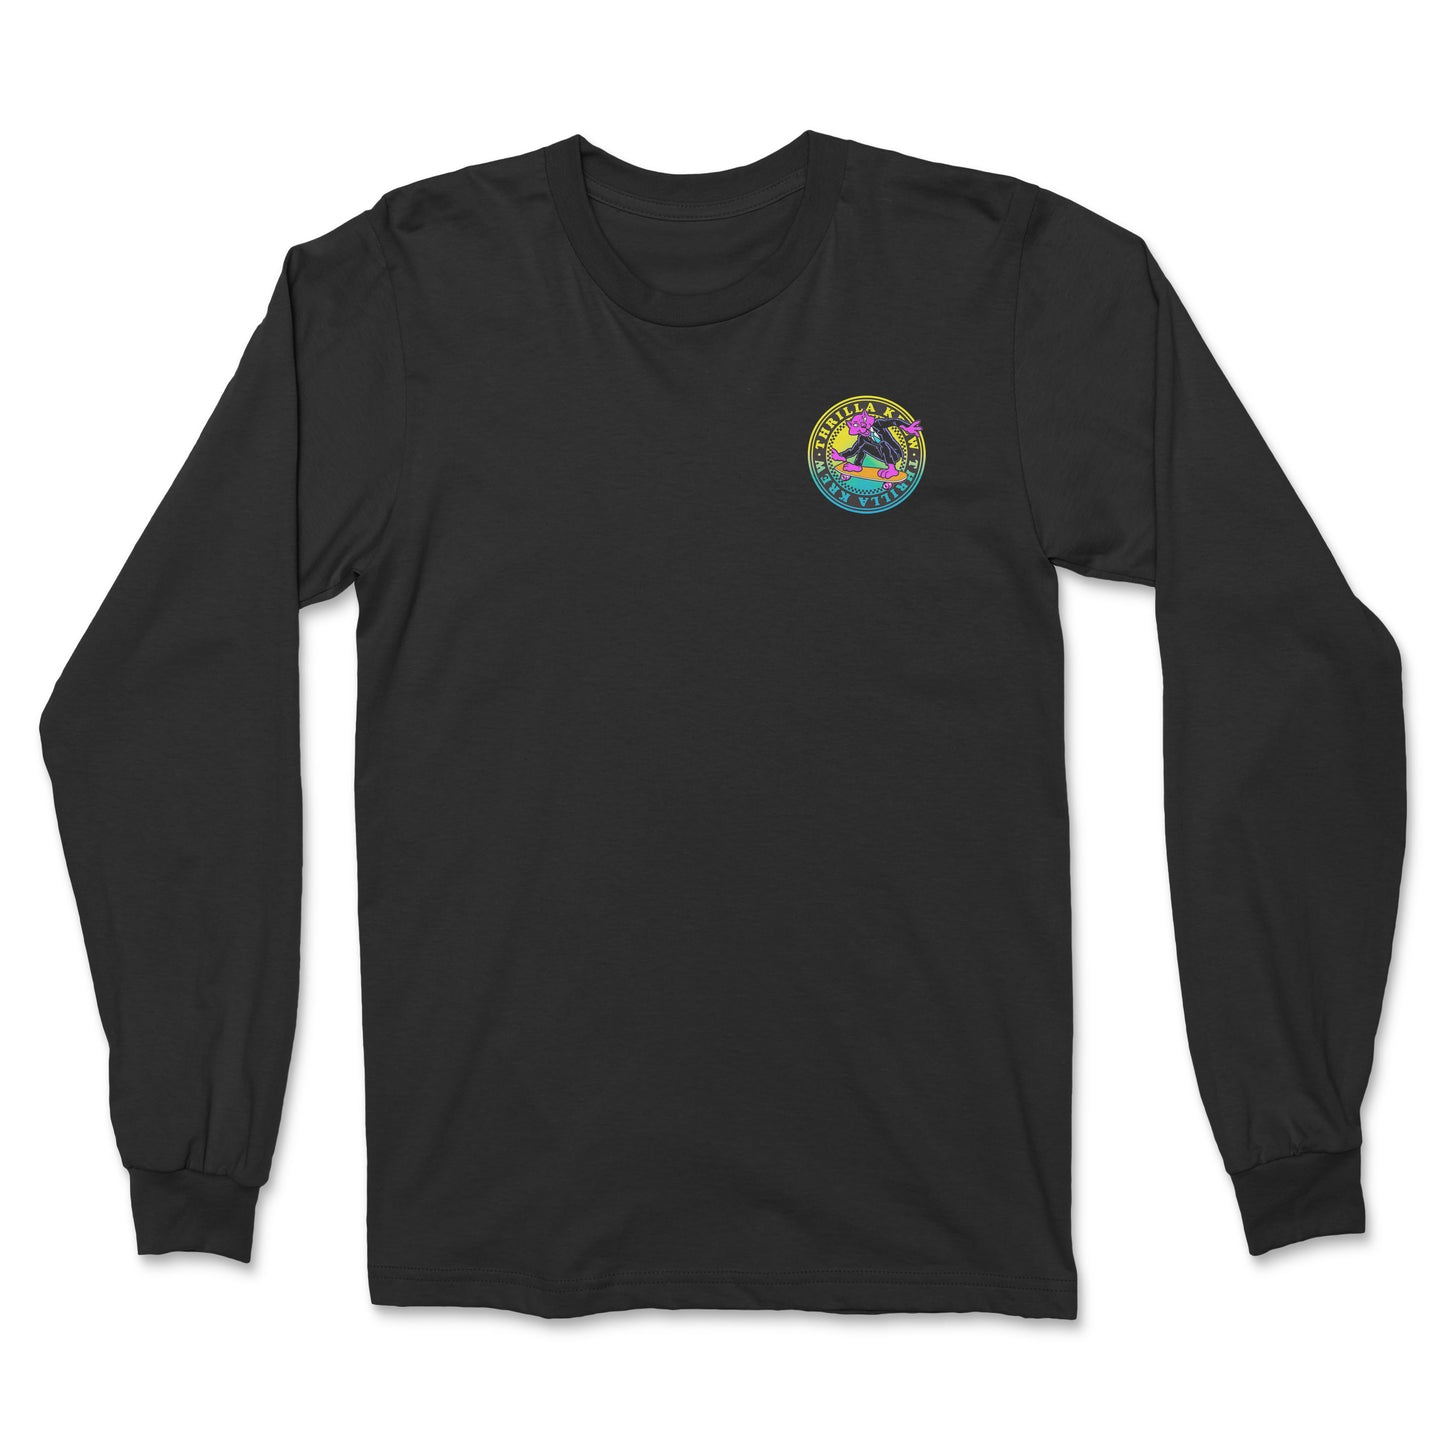 Alley Cats Long Sleeve